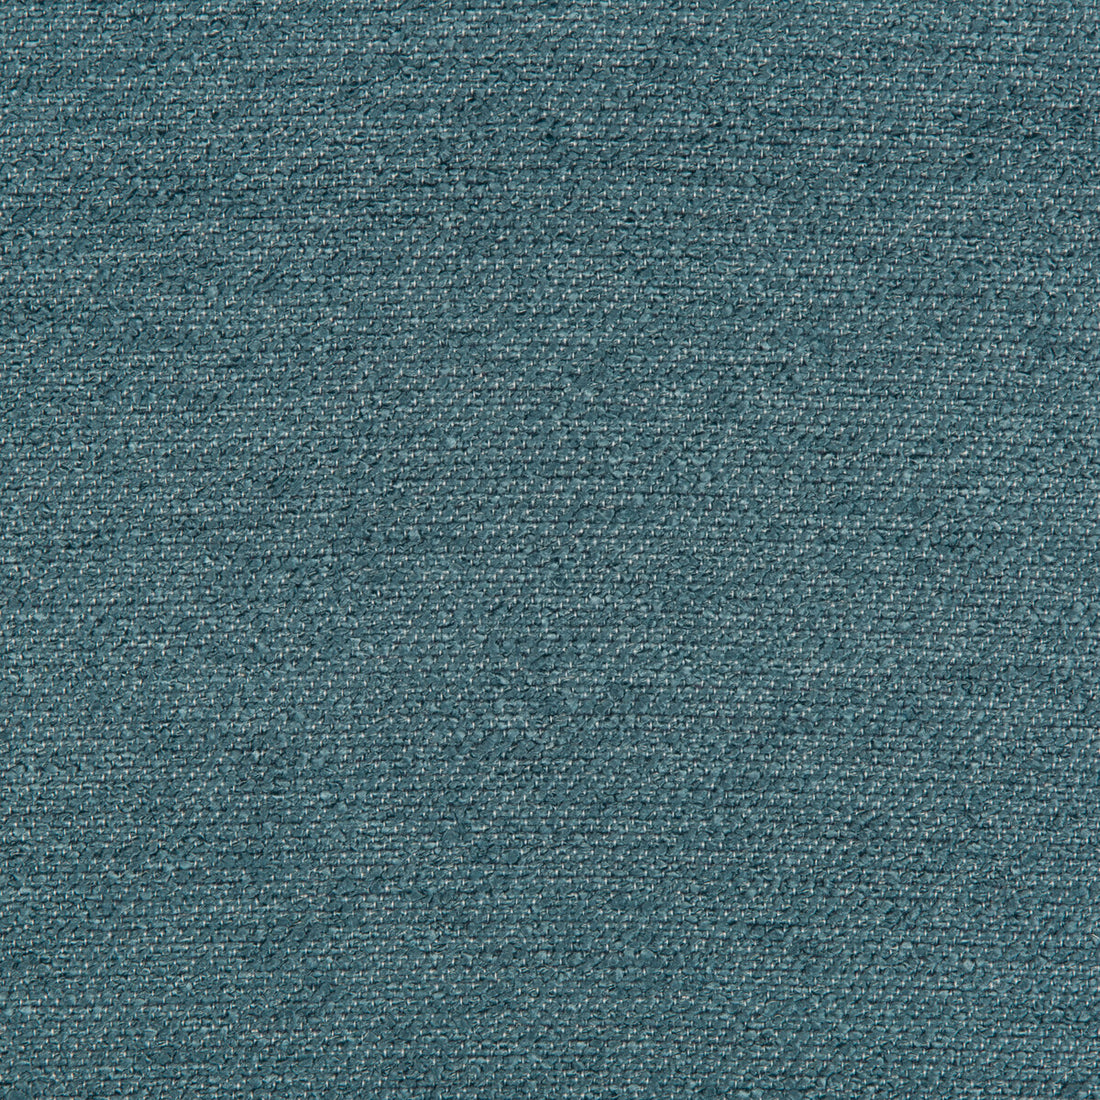 Kravet Contract fabric in 35142-53 color - pattern 35142.53.0 - by Kravet Contract in the Incase Crypton Gis collection